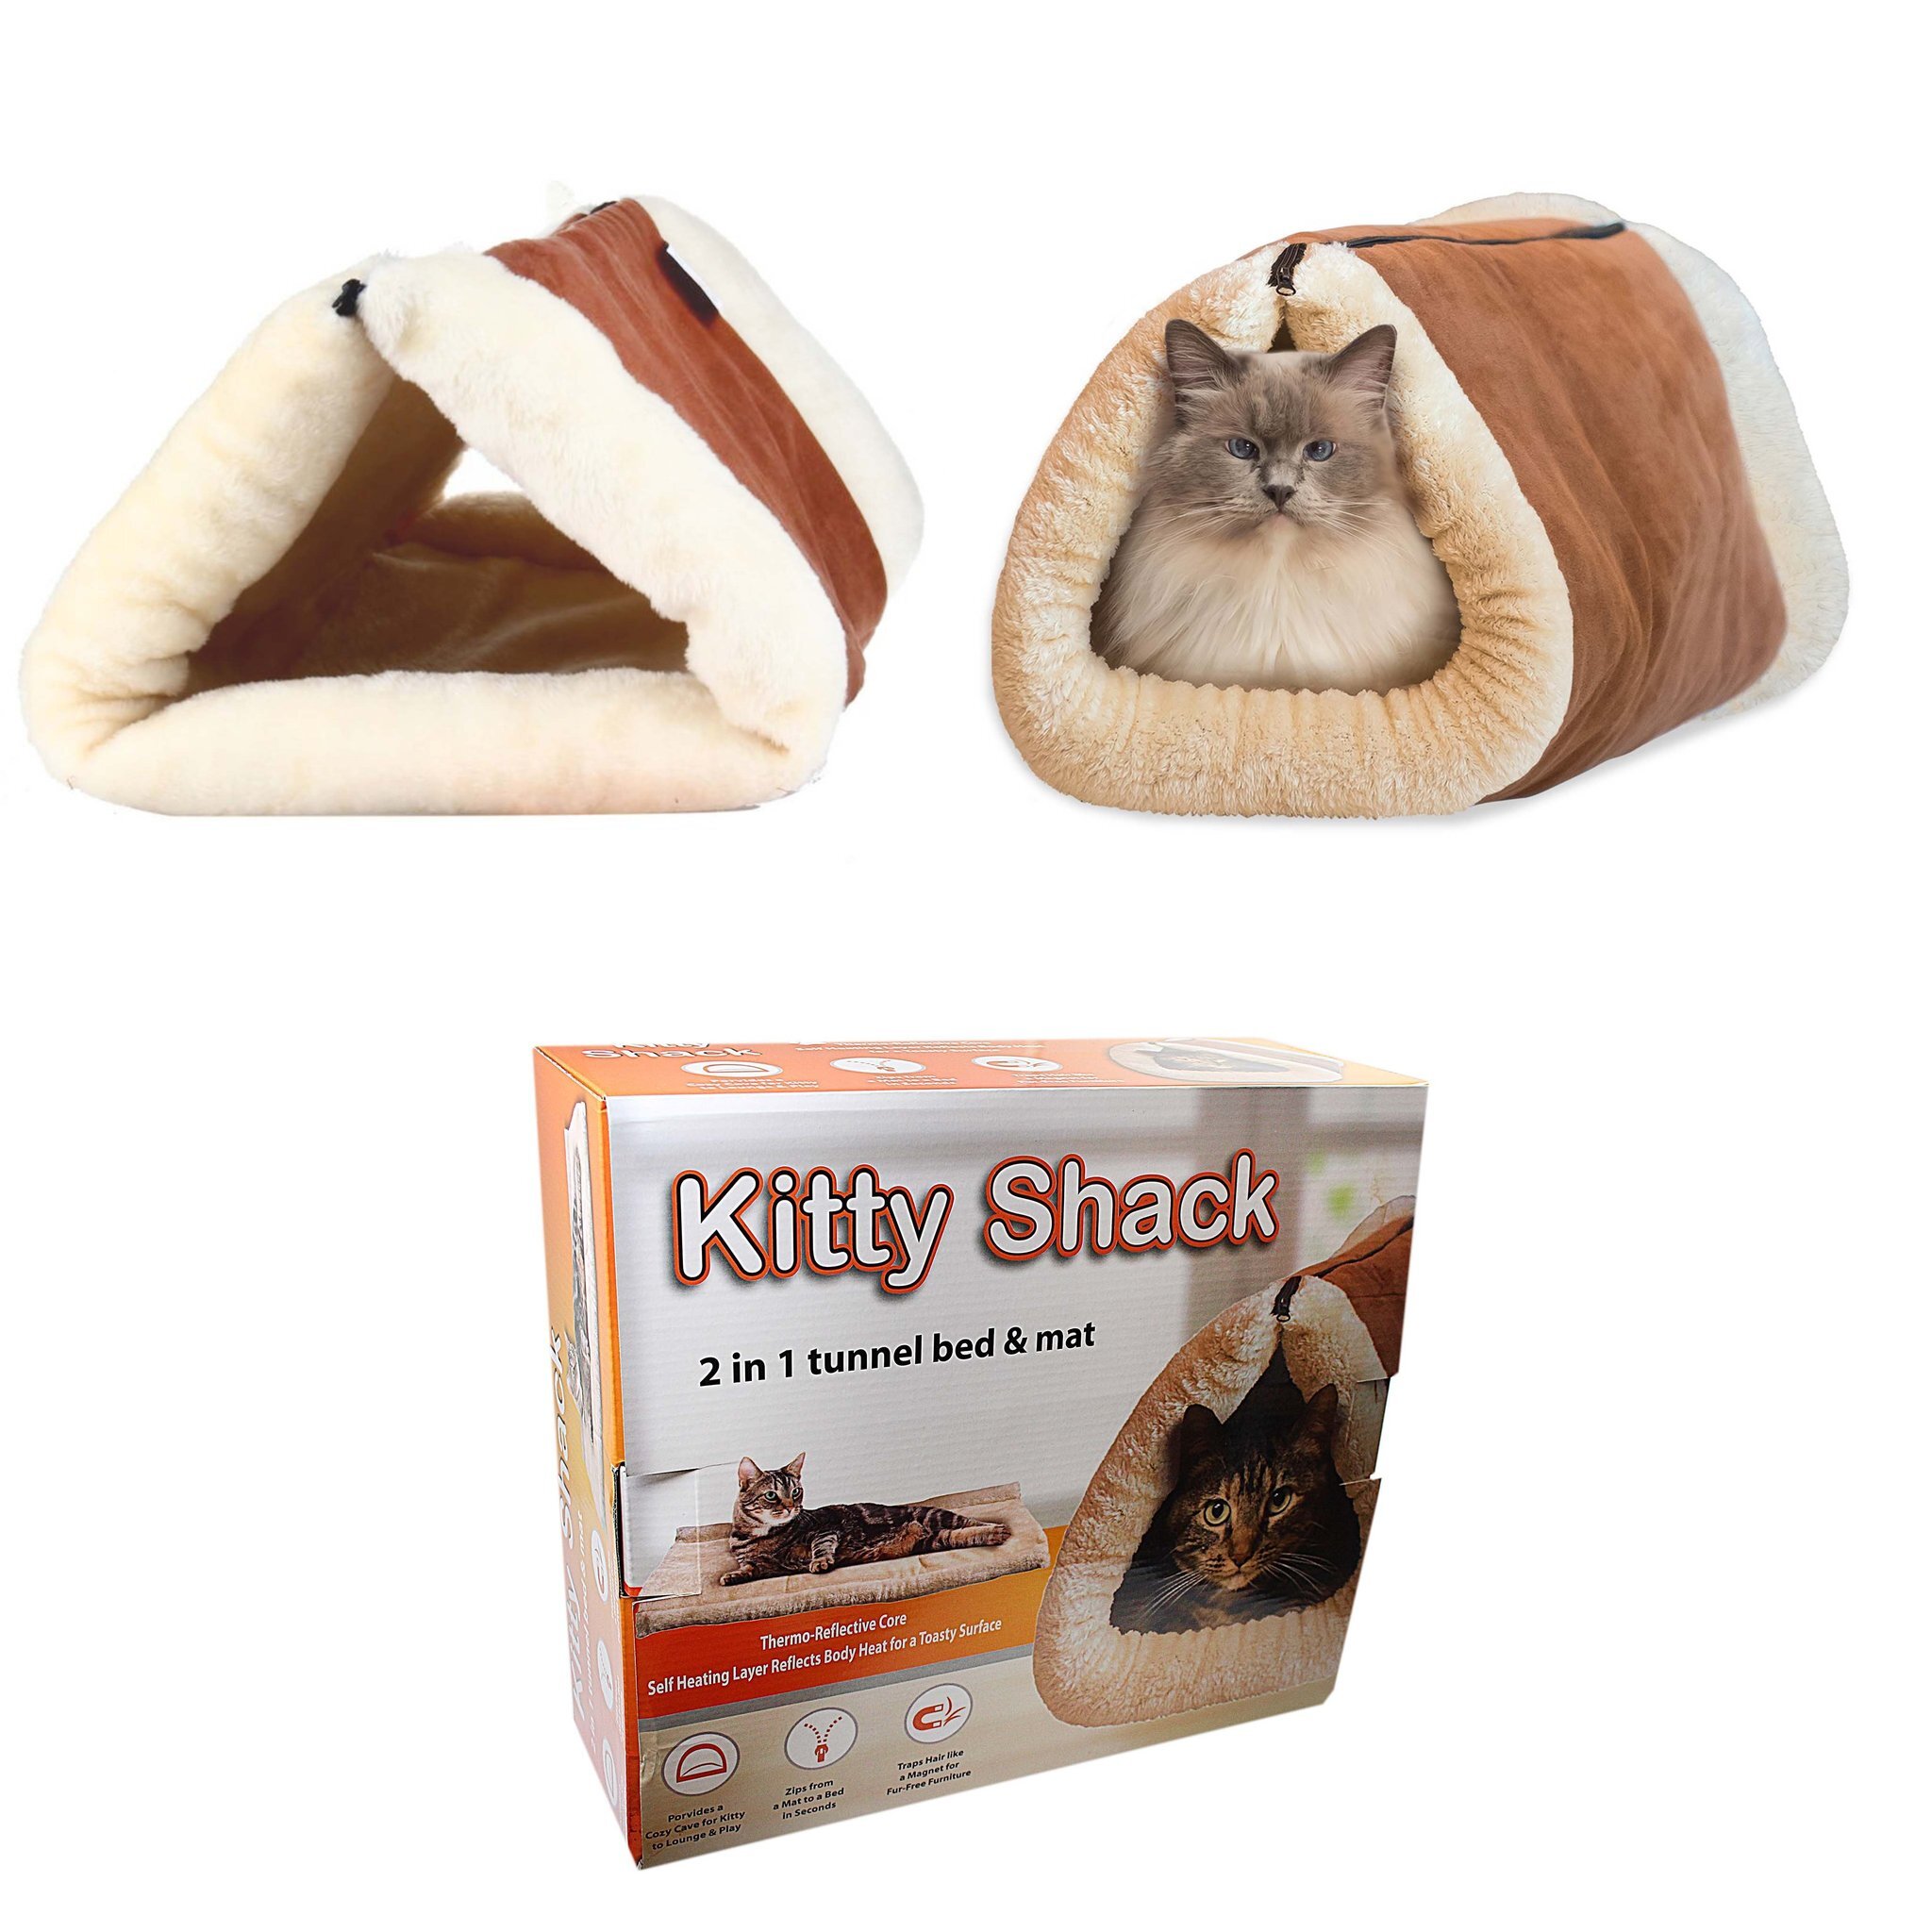 2 In 1 Kitty Shack Self Heating Cat/Kitty Portable Hot Bed & Mat